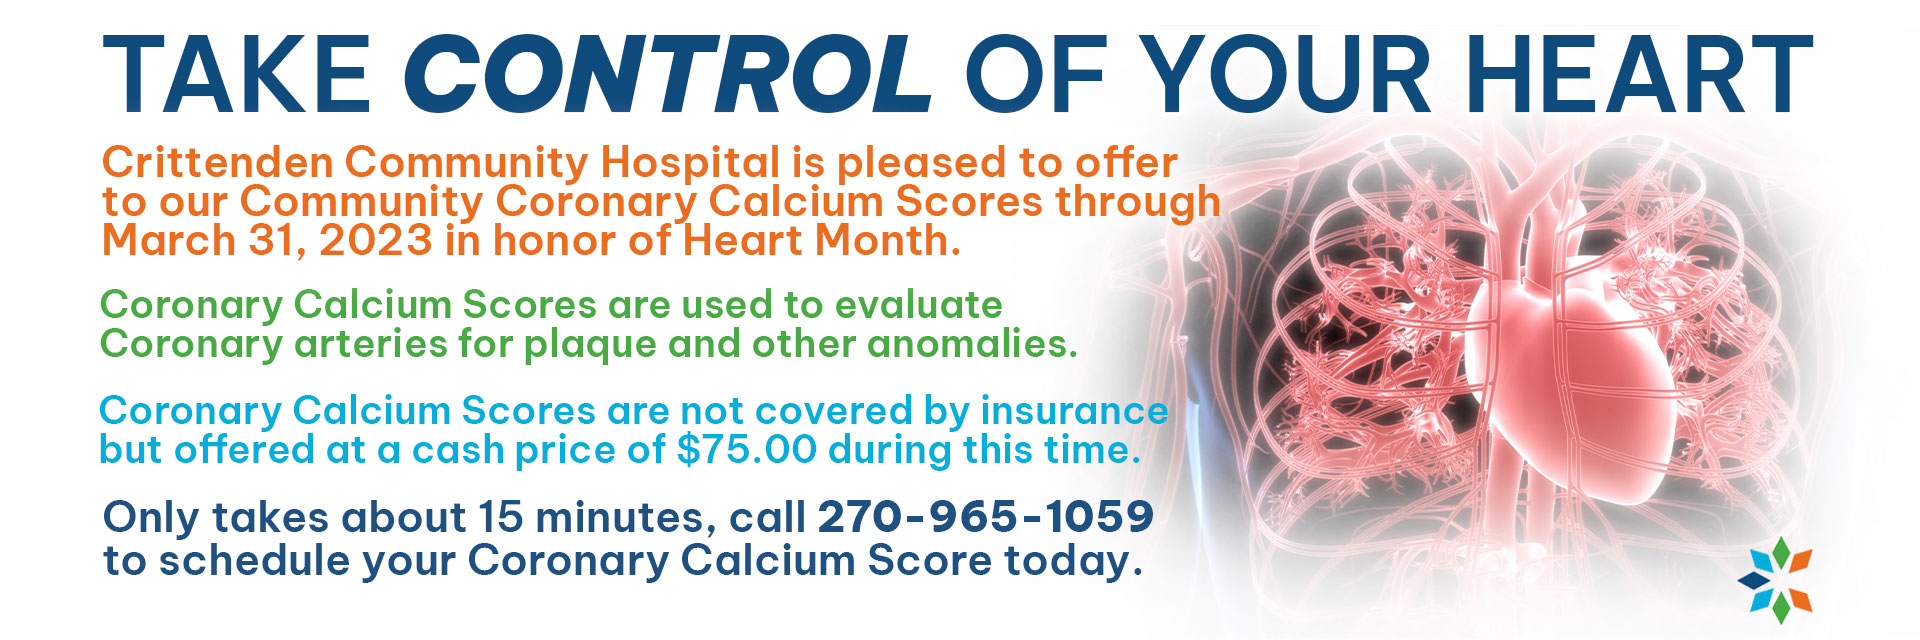 Crittenden Community Hospital is pleased to offer to our Community Coronary Calcium Scores through March 31, 2023 in honor of Heart Month.  Coronary Calcium Scores are used to evaluate Coronary arteries for plaque and other anomalies.  Coronary Calcium Scores are not covered by insurance but offered at a cash price of $75.00 during this time.  Only takes about 15 minutes, call 270-965-1059 to schedule your Coronary Calcium Score today.